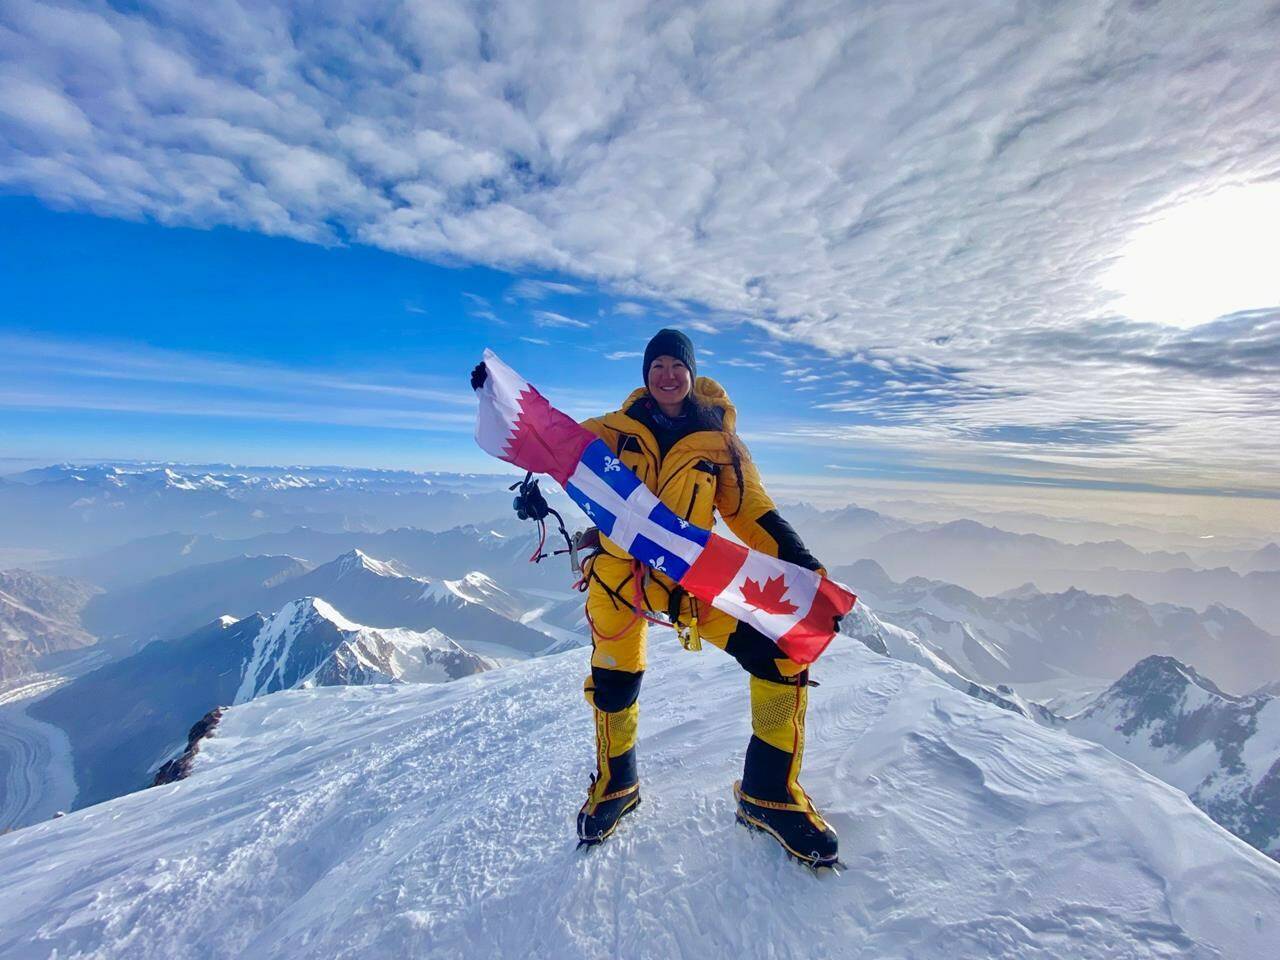 Marie-Pier Desharnais is shown atop K2 in this July 2022 handout photo. Marie-Pier Desharnais reached the top of K2 - renowned as one of the toughest mountains on earth - becoming one of the only women in Canada to summit the 8,611-metre monolith on the China-Pakistan border. THE CANADIAN PRESS/HO - Marie-Pier Desharnais